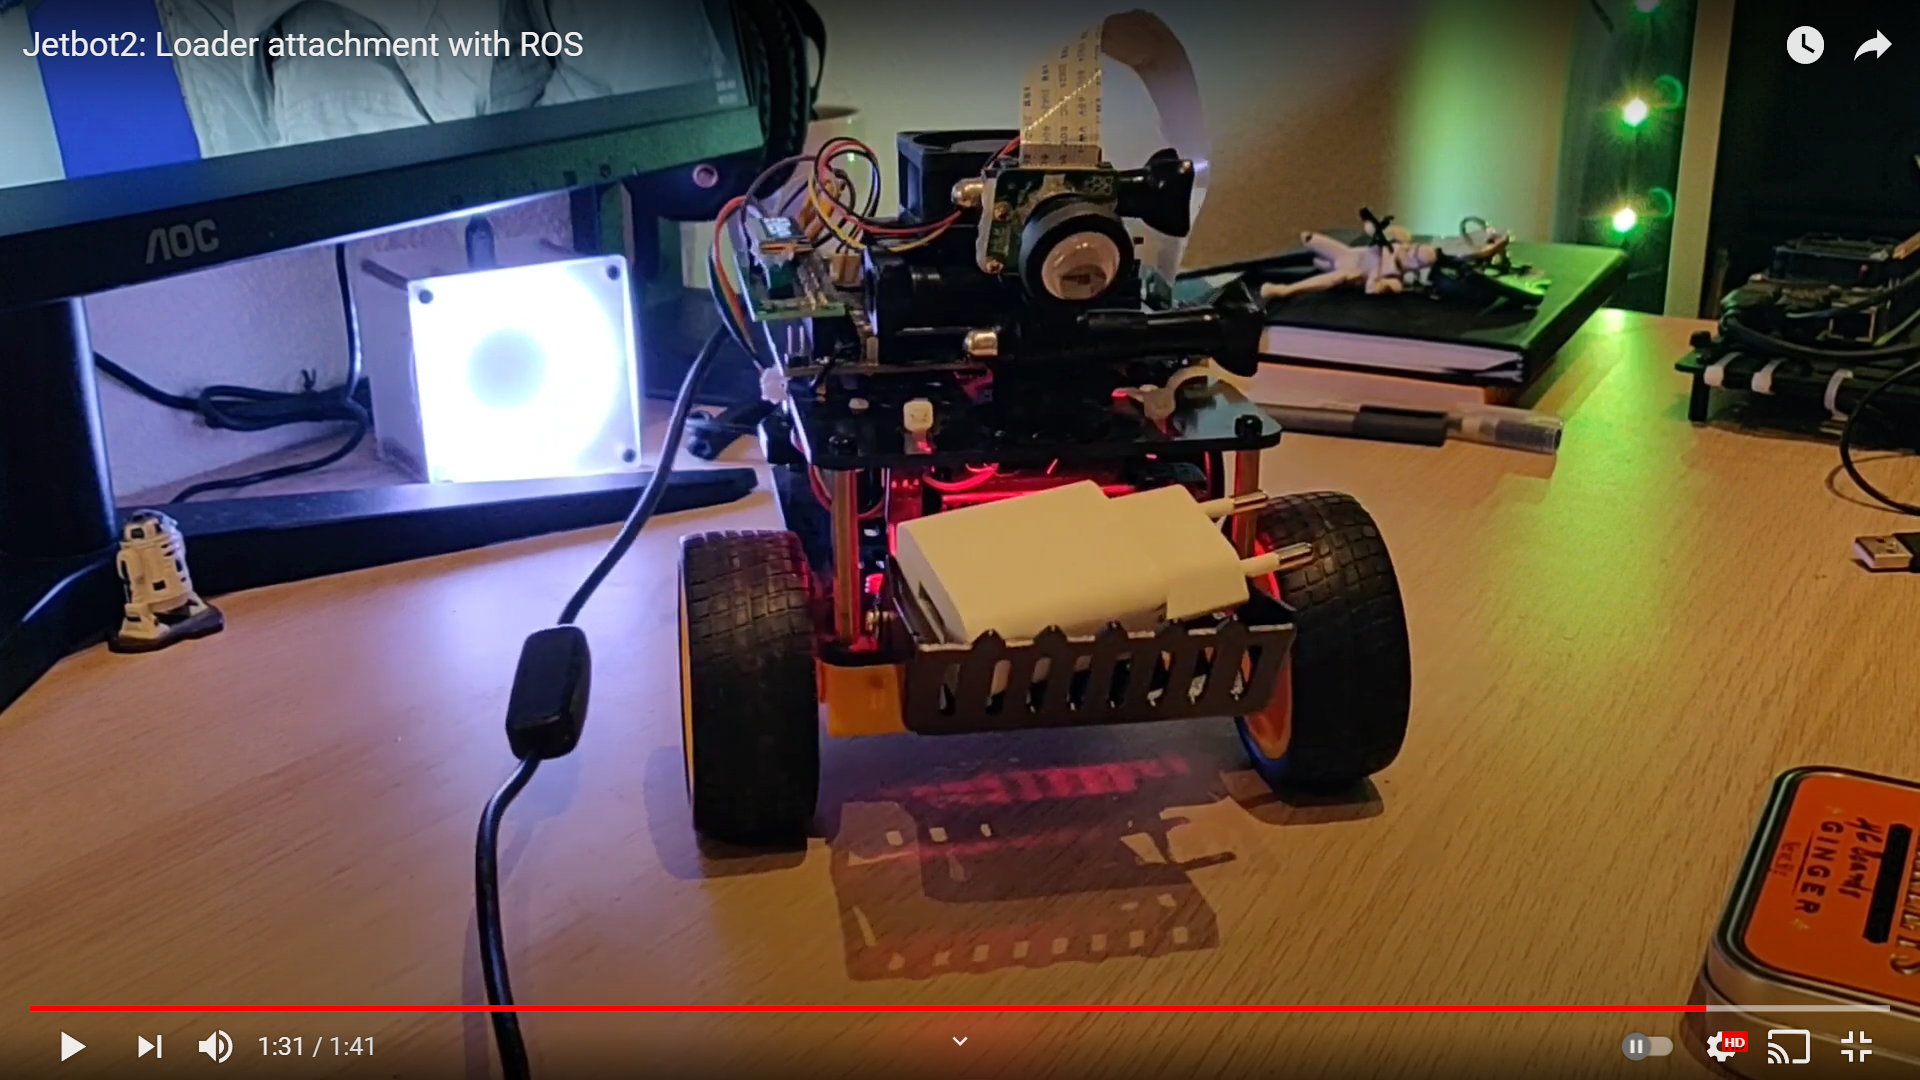 Jetbot2: Loader attachment with ROS